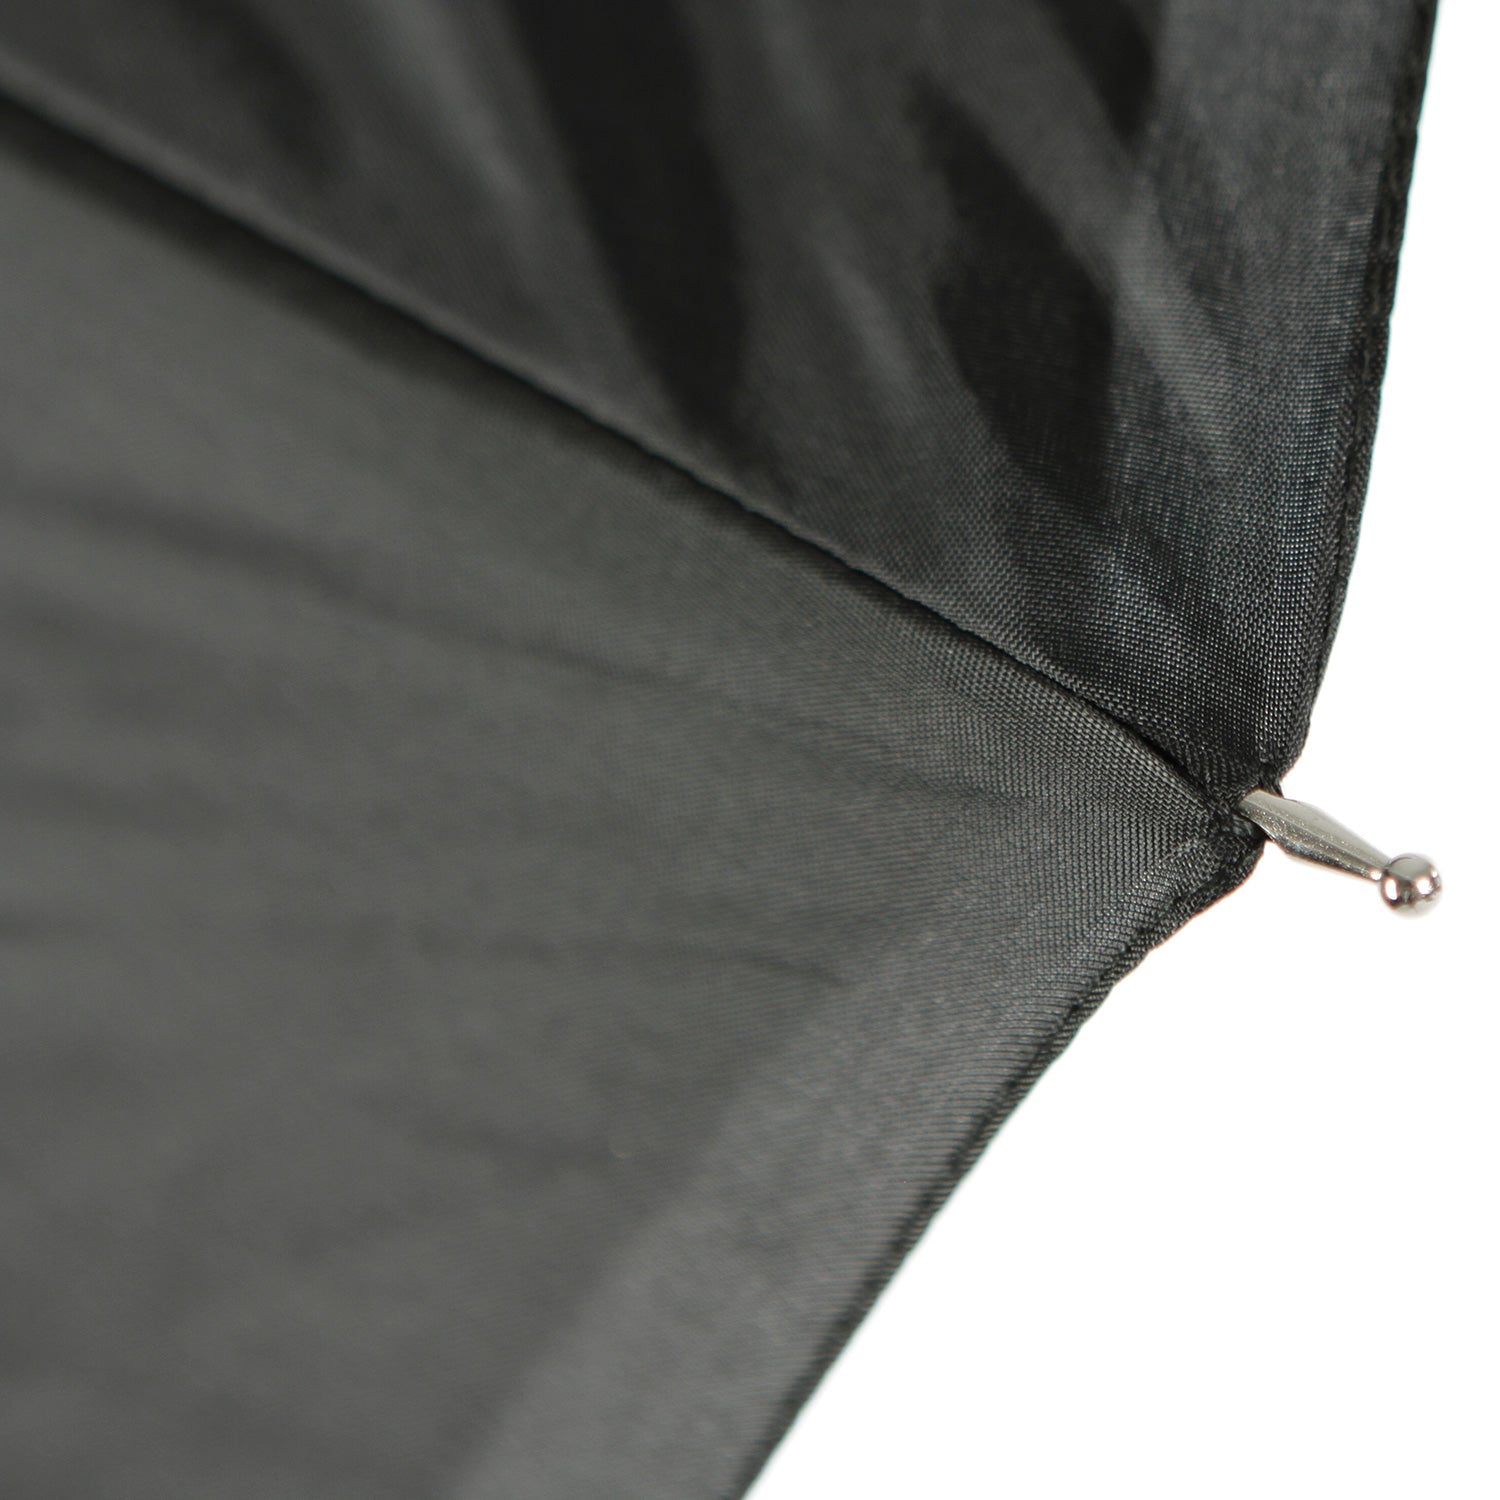 Convertible Umbrella - Optical White Satin with Removable Black Cover